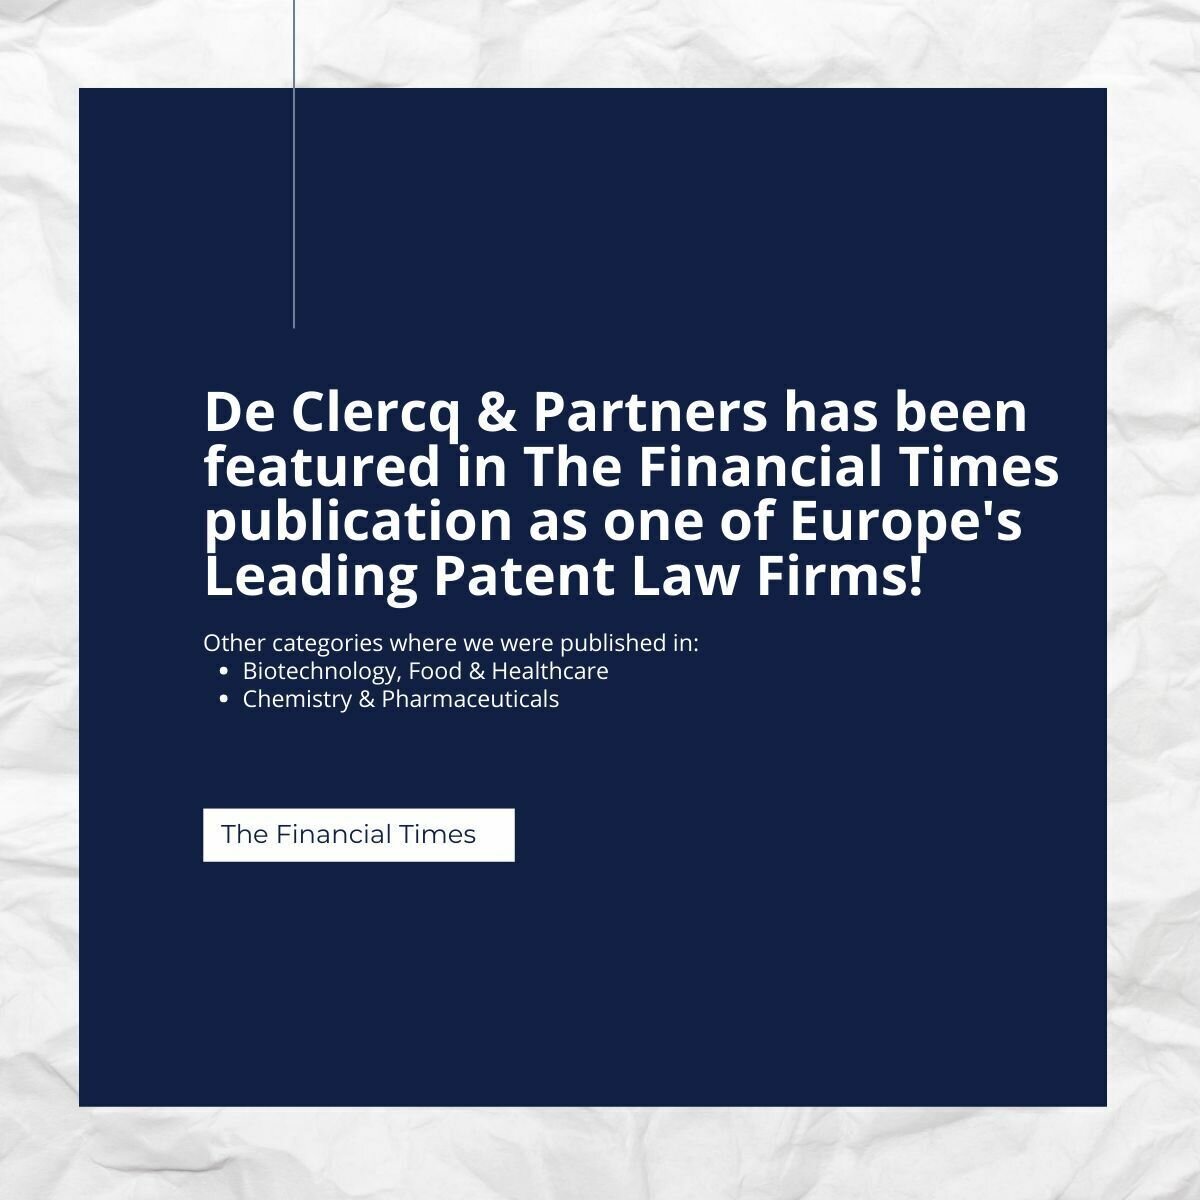 De Clercq & Partners recognized by The Financial Times as one of Europe's Leading Patent Law Firms!